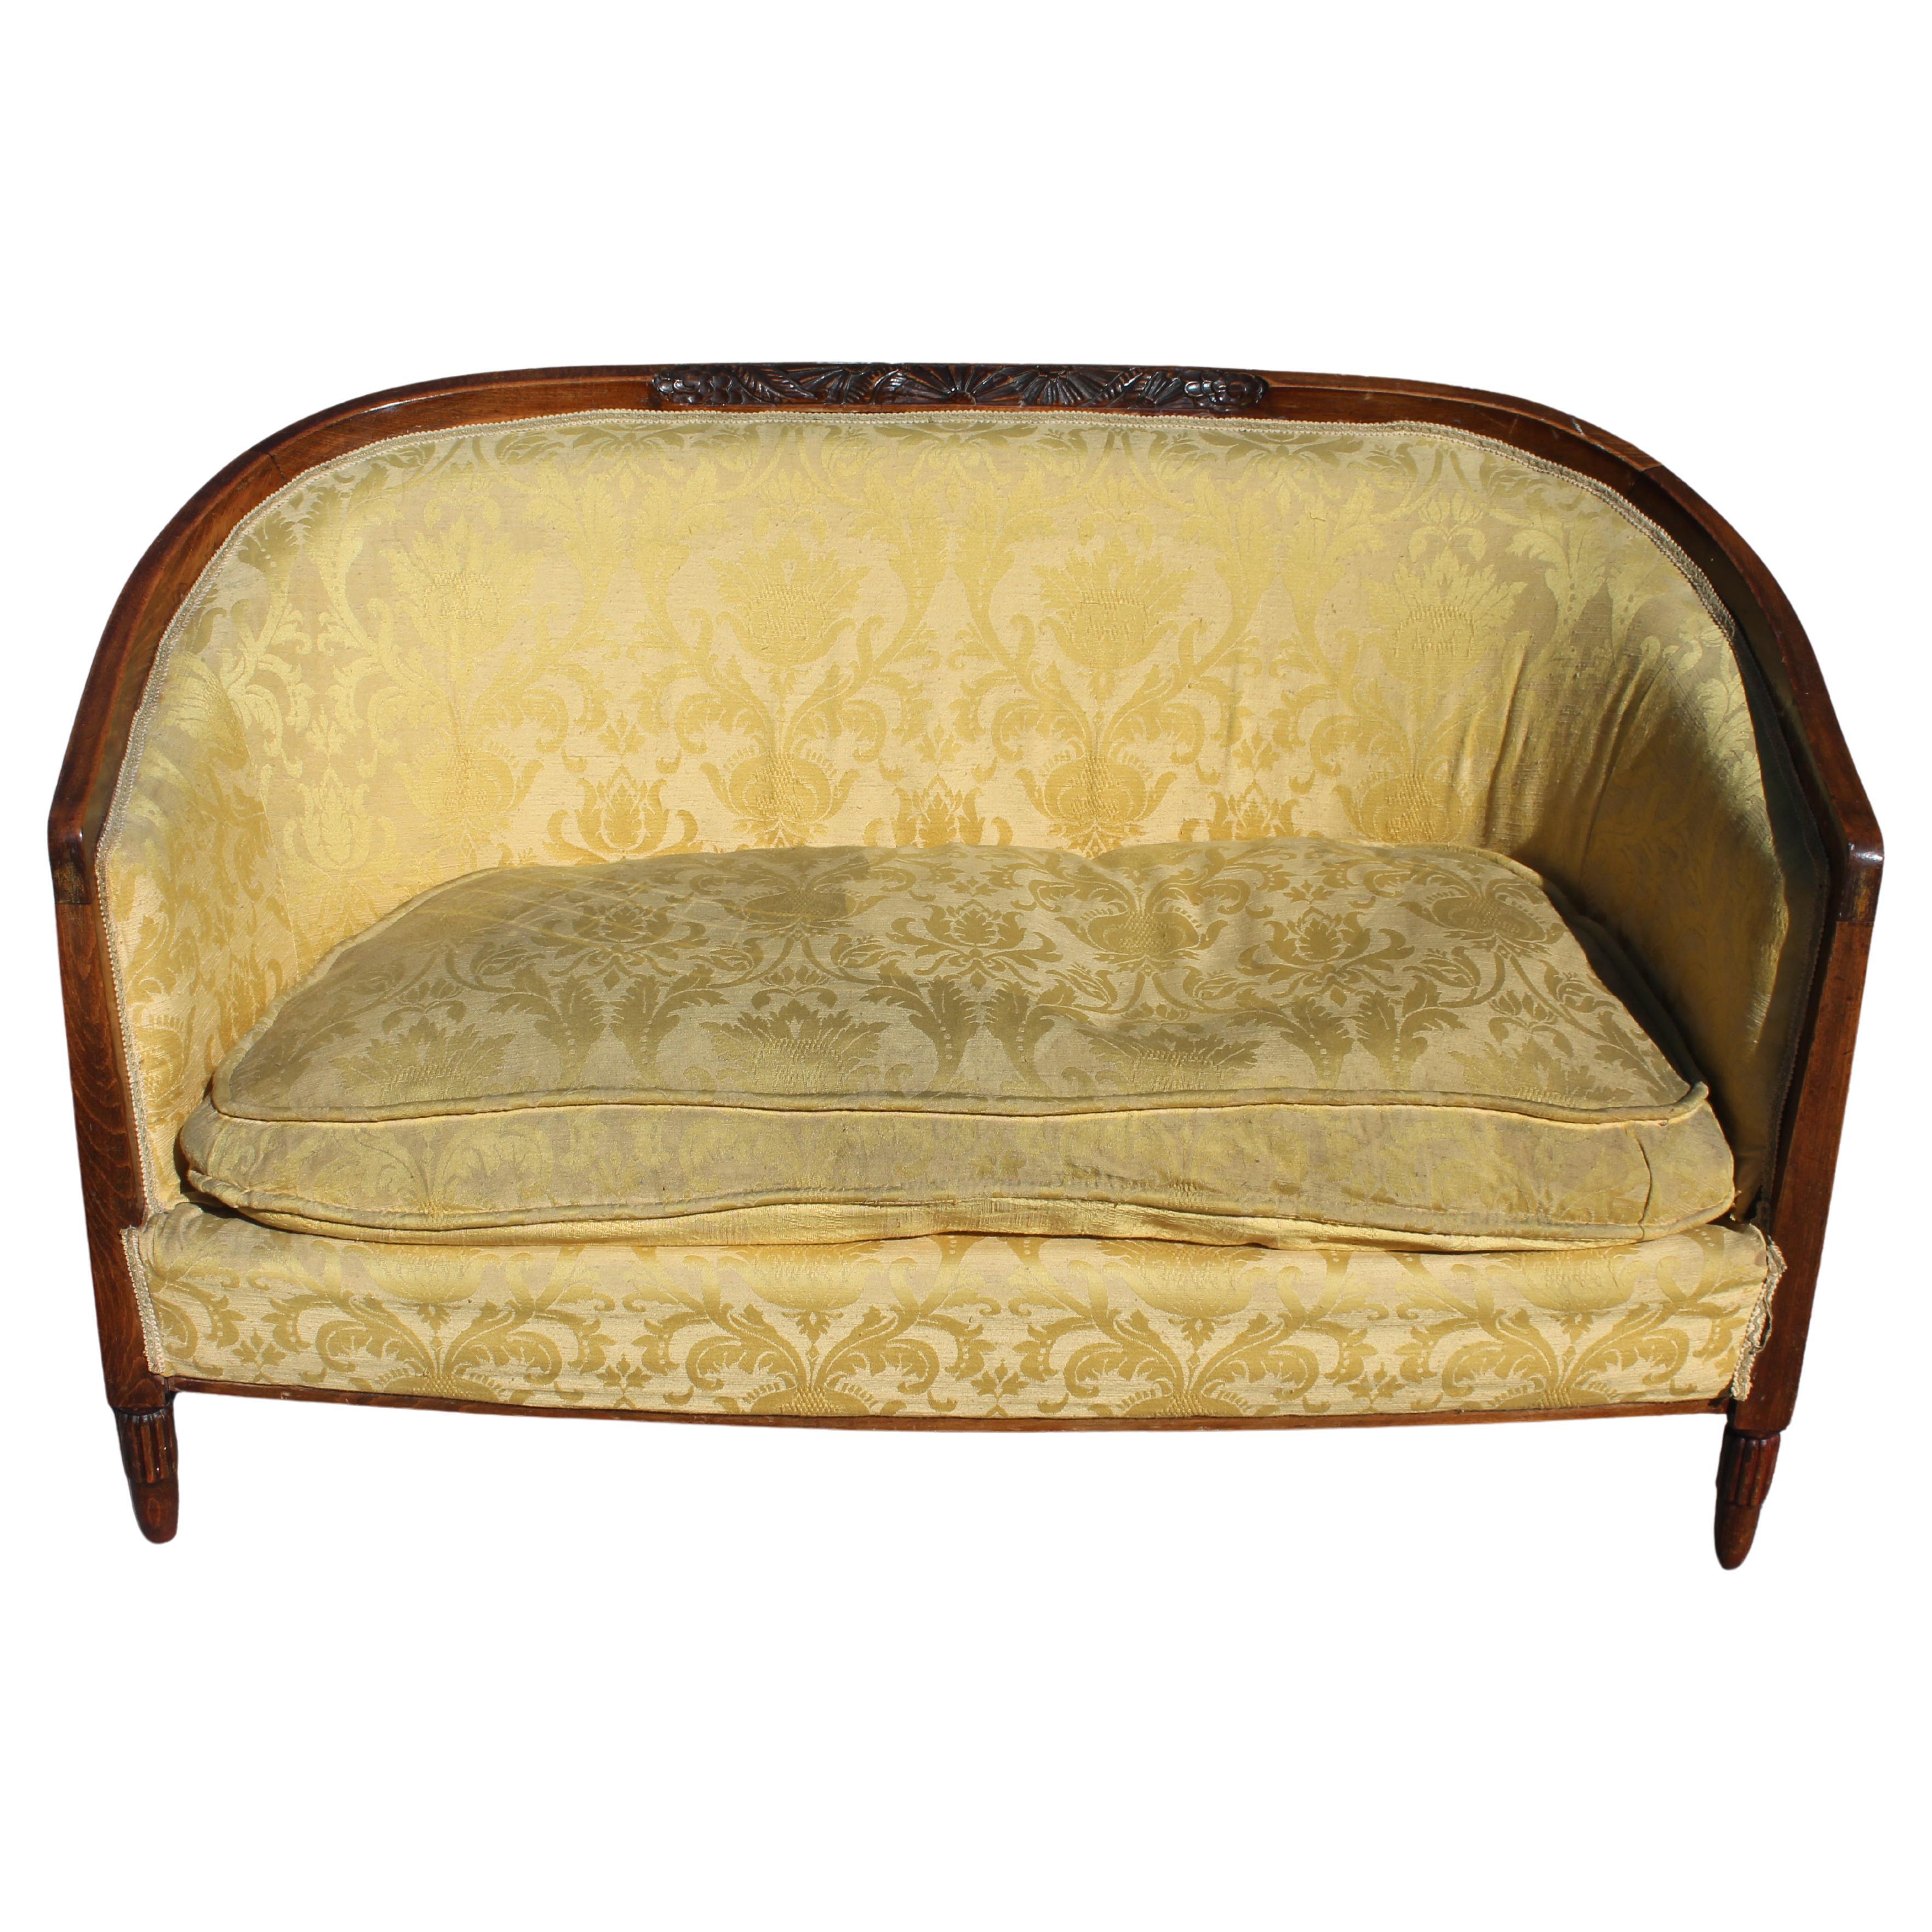 1930's Rare French Art Deco Carved Canape/ Sofa For Sale